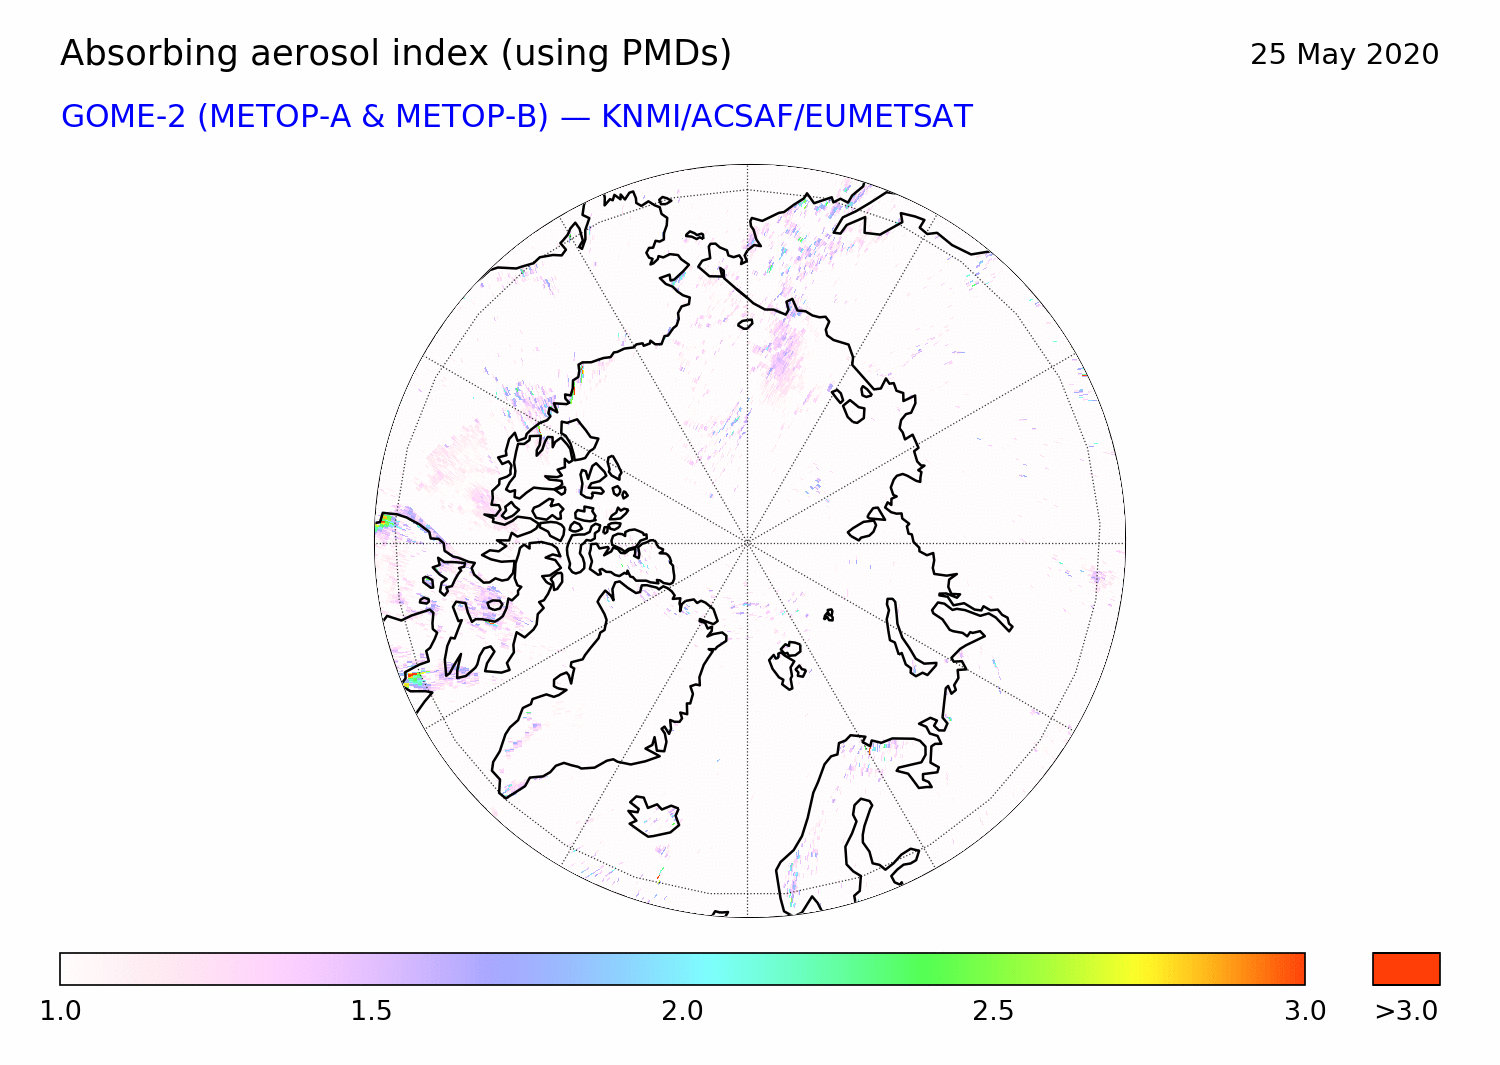 GOME-2 - Absorbing aerosol index of 25 May 2020